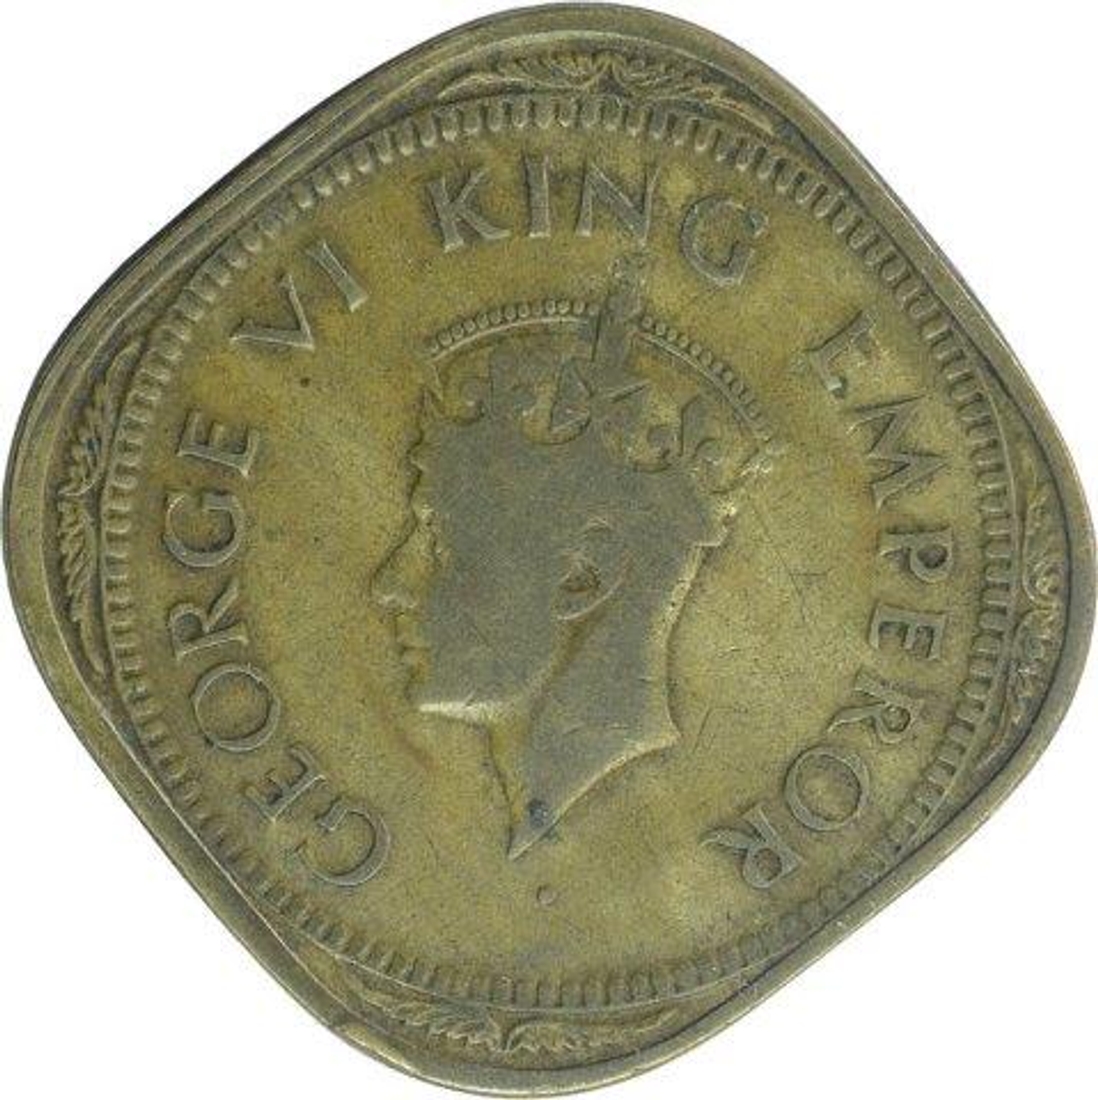 Error Copper Nickle Two Annas Coin of King George VI.